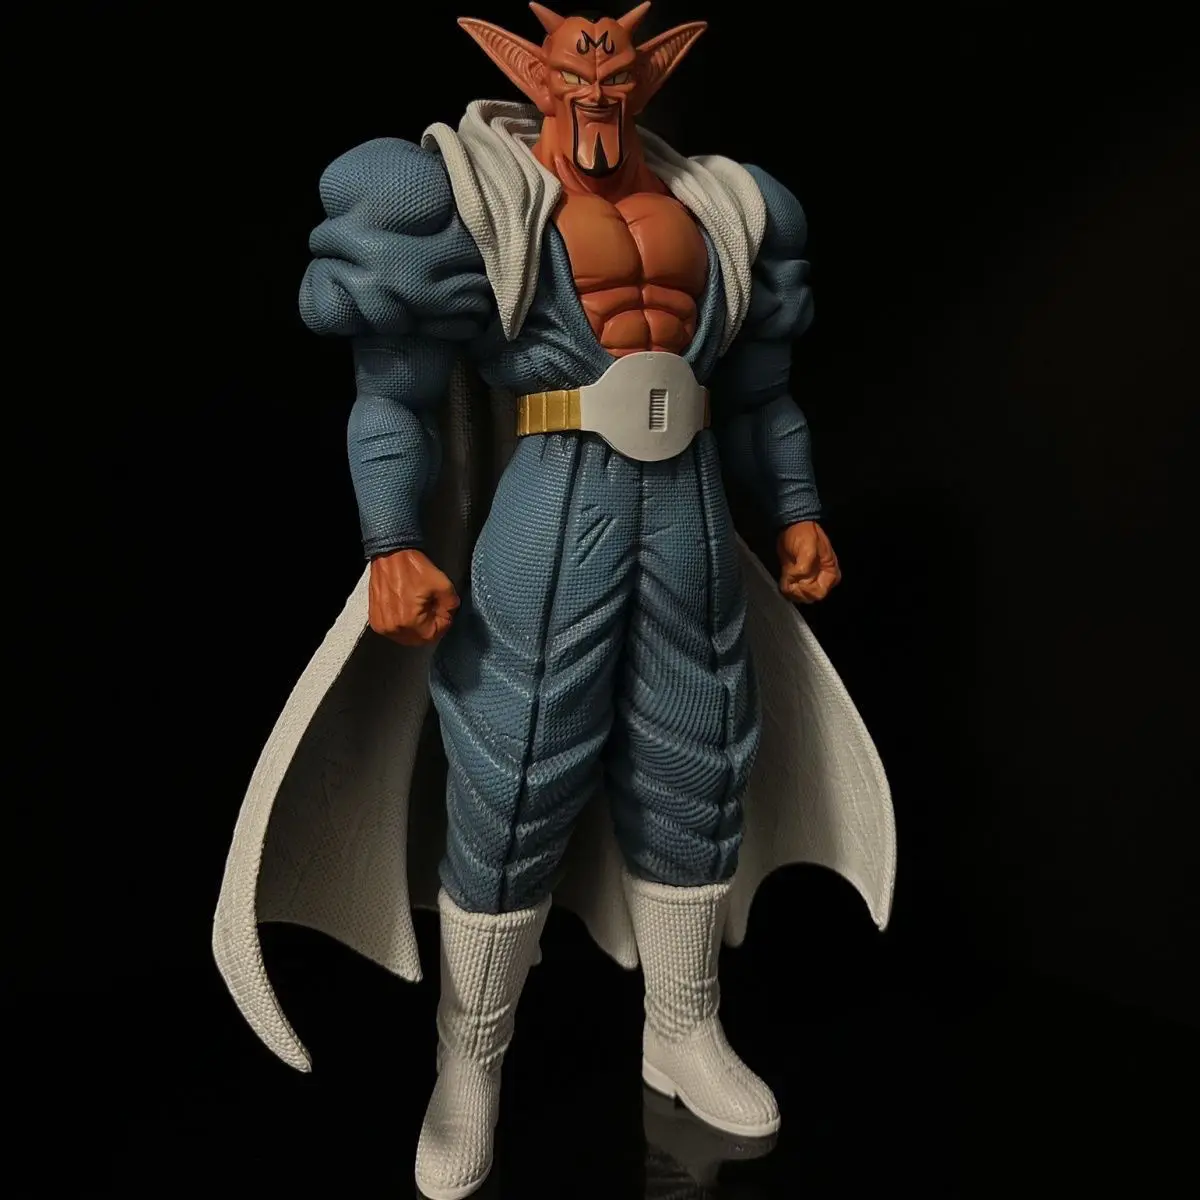 Dragon Ball Z Anime Figures 35cm GK Prince of The Devils Dabura Action Figure PVC Toys Juguetes DBZ Model Doll Gift Brinquedos